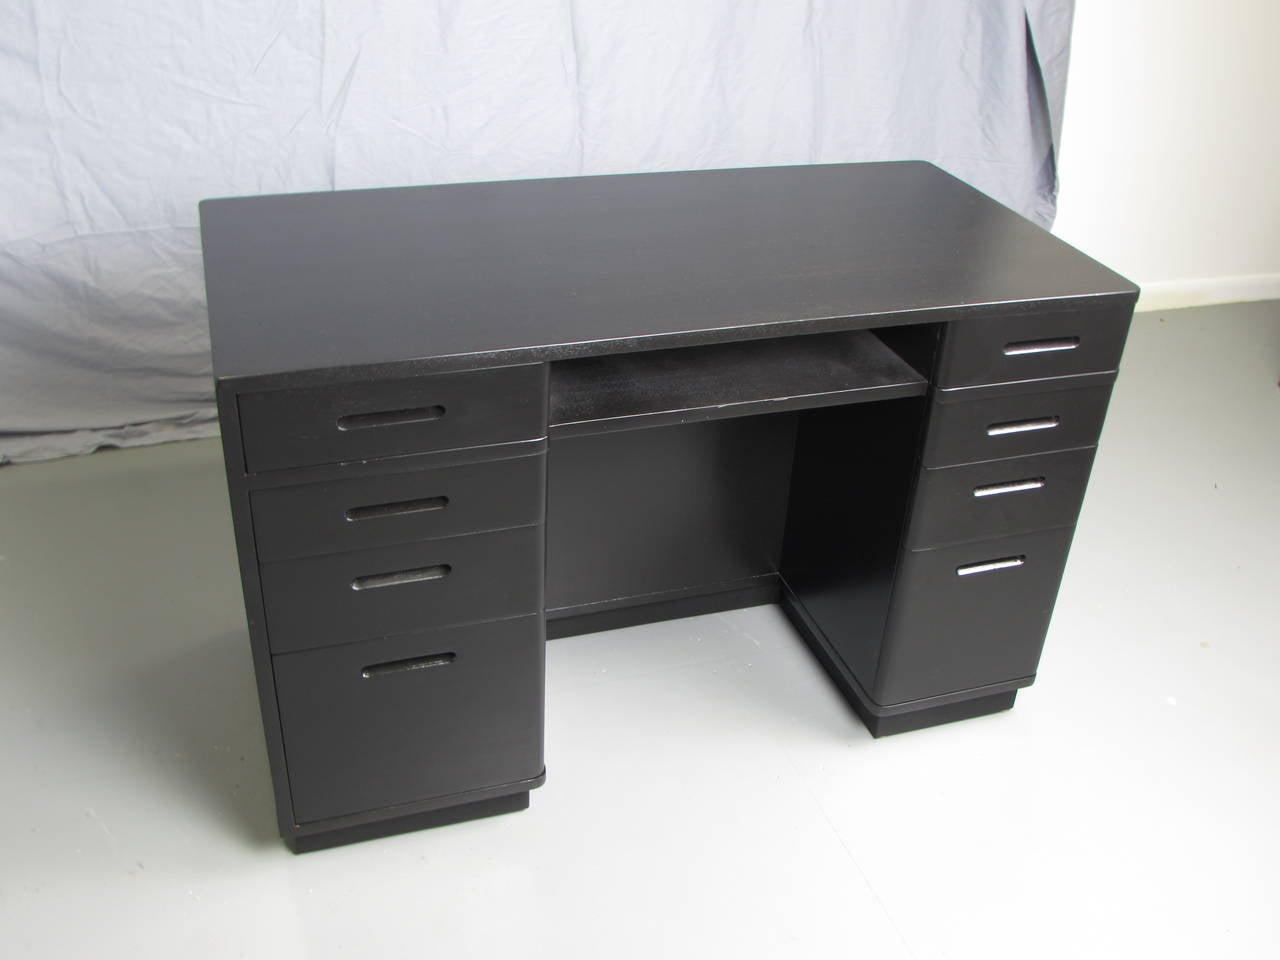 Mid-20th Century Rare Kneehole Desk with Shelves by Edward Wormley for Dunbar Model 4176, 1950s